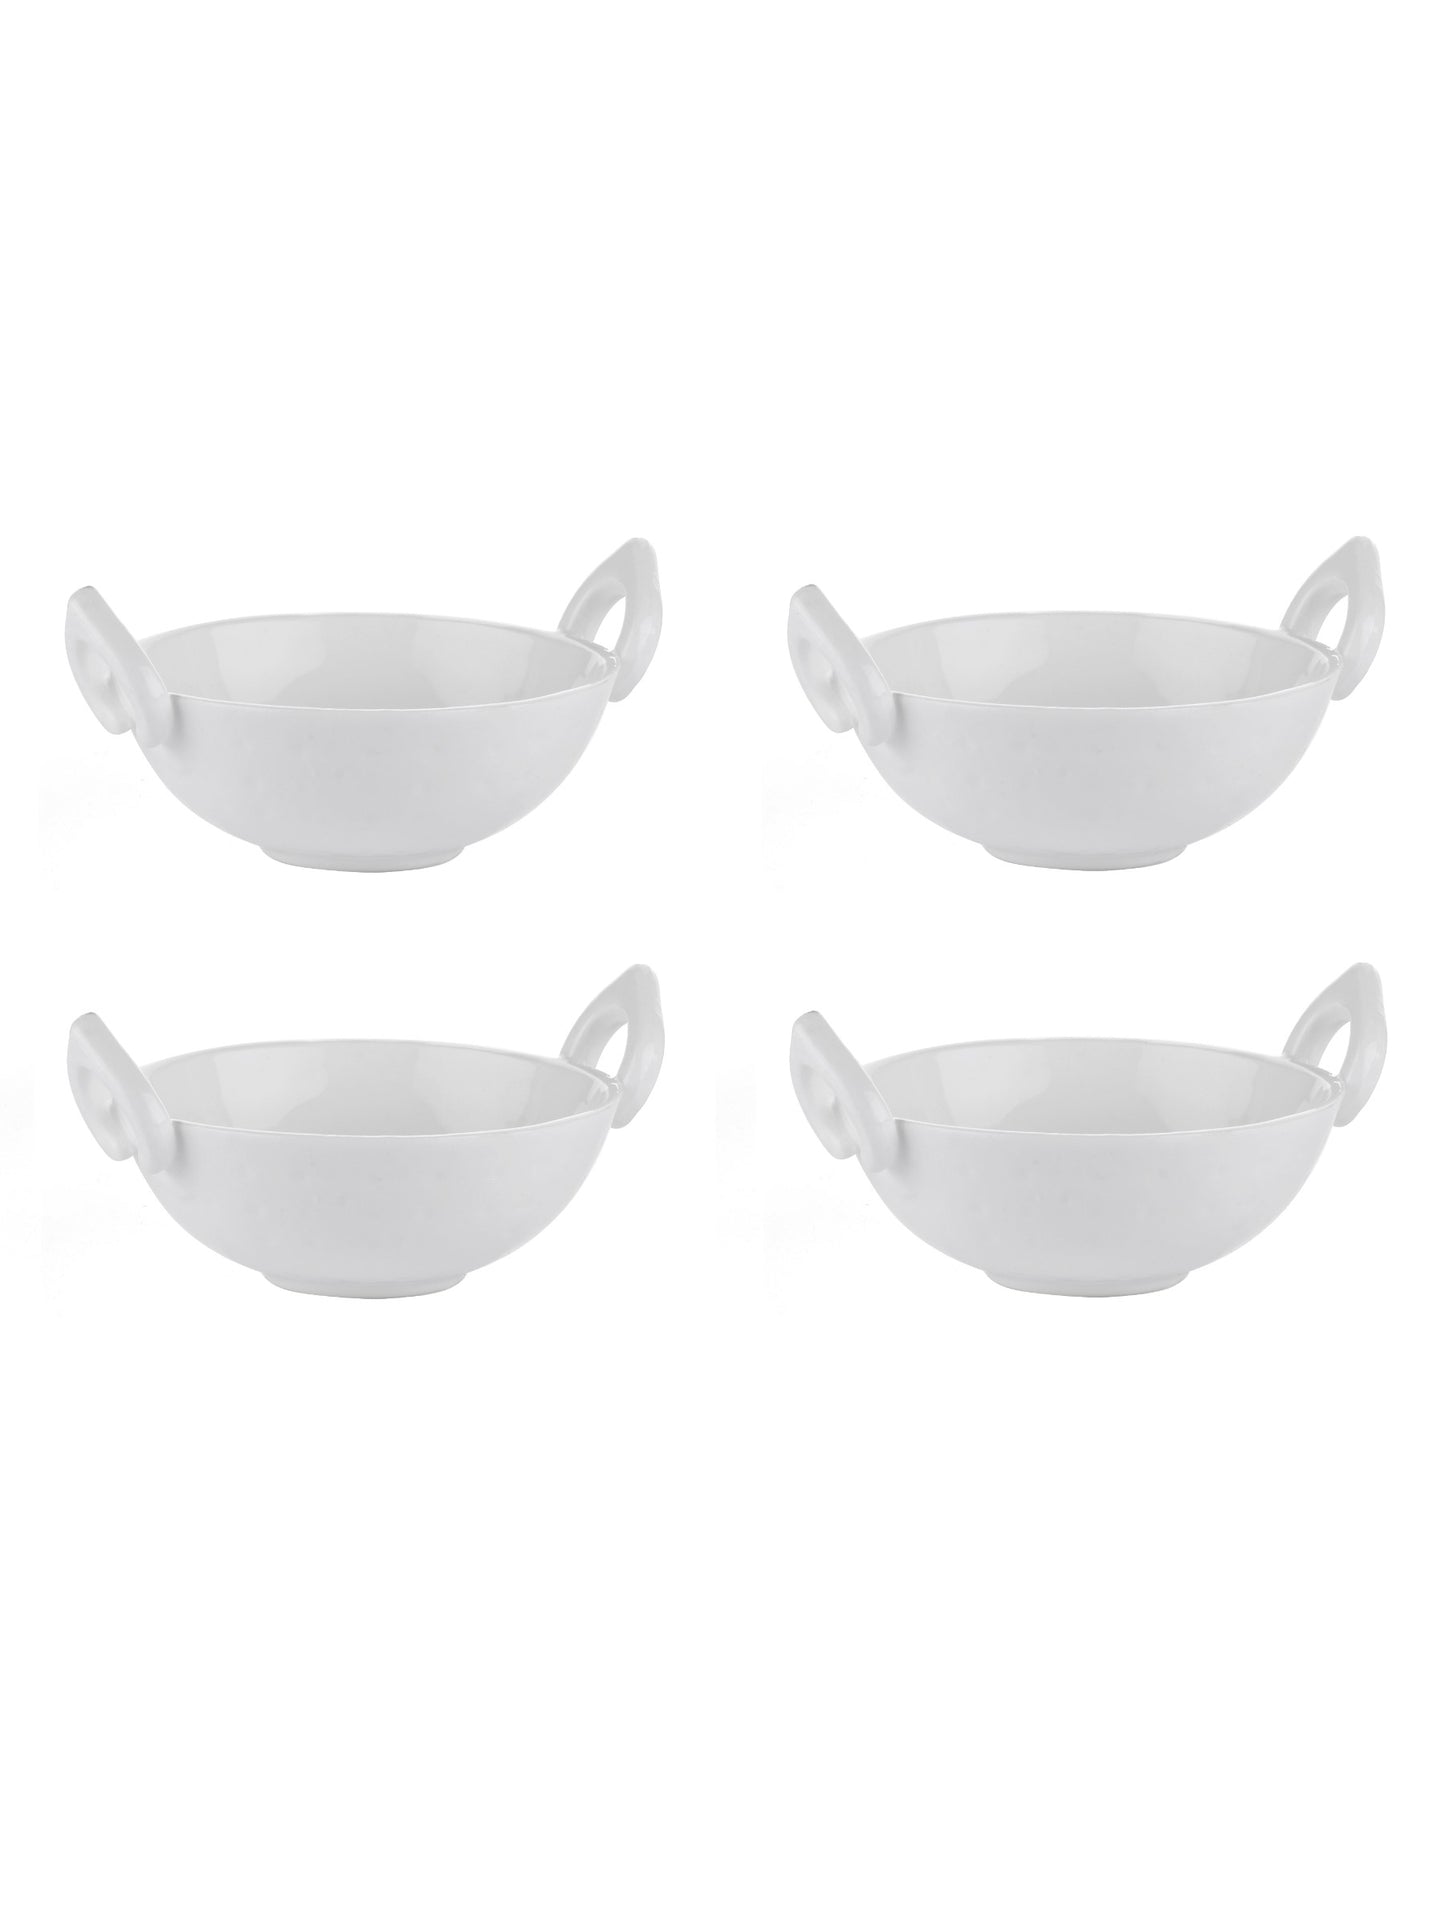 Clay Craft Small Kadhai Shaped Condiment/Dipping Bowls Set of 4 - 50 ml each